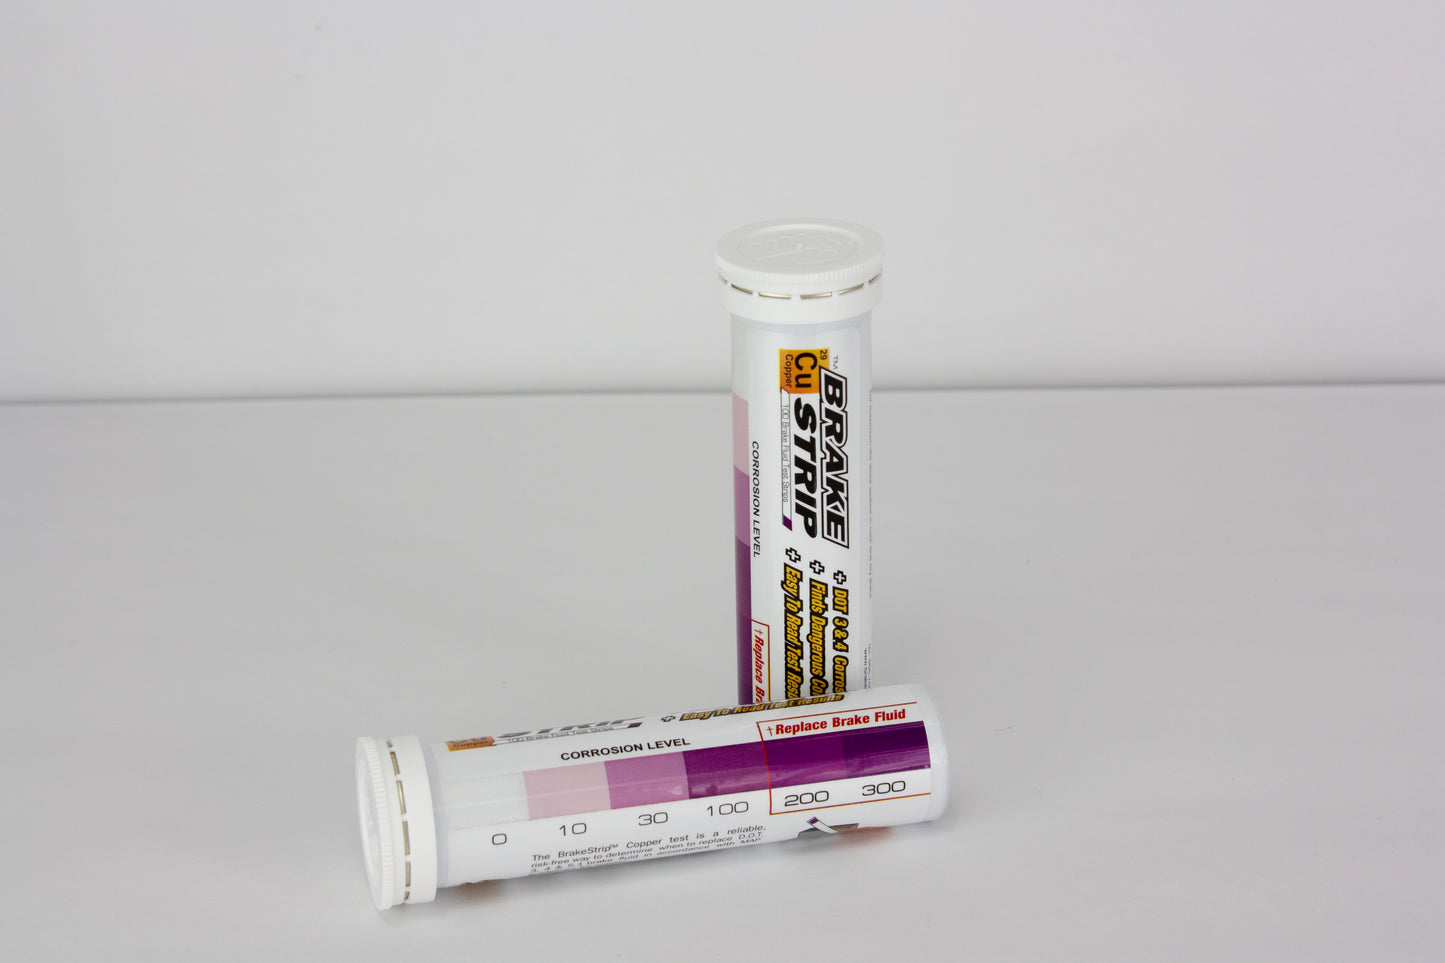 The image shows two tubes of Brake Fluid Test Strips sitting on a table. The text on the tubes is appears to be a label for the product and instructions on how to use the test strips. There is also a chart that indicates a range of corrosion levels.